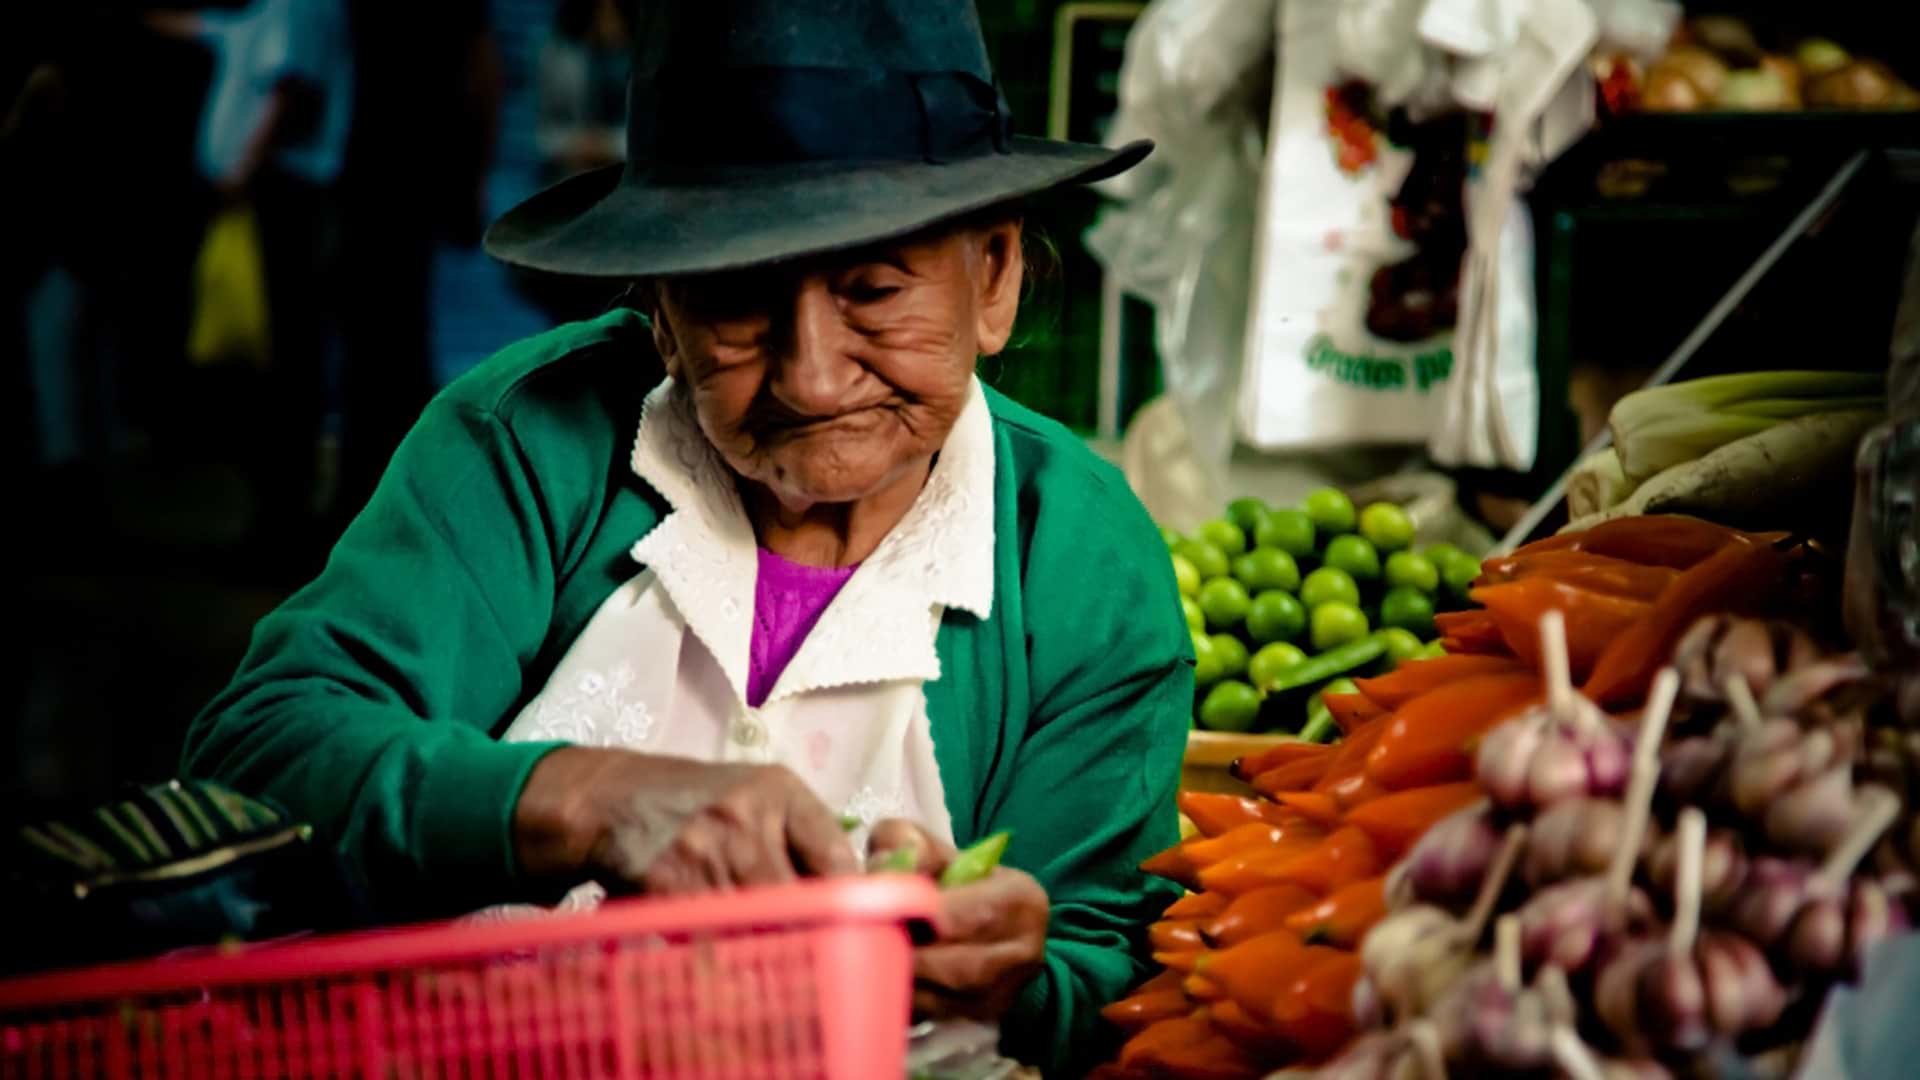 Old lady of a market stall | Responsible Travel Peru